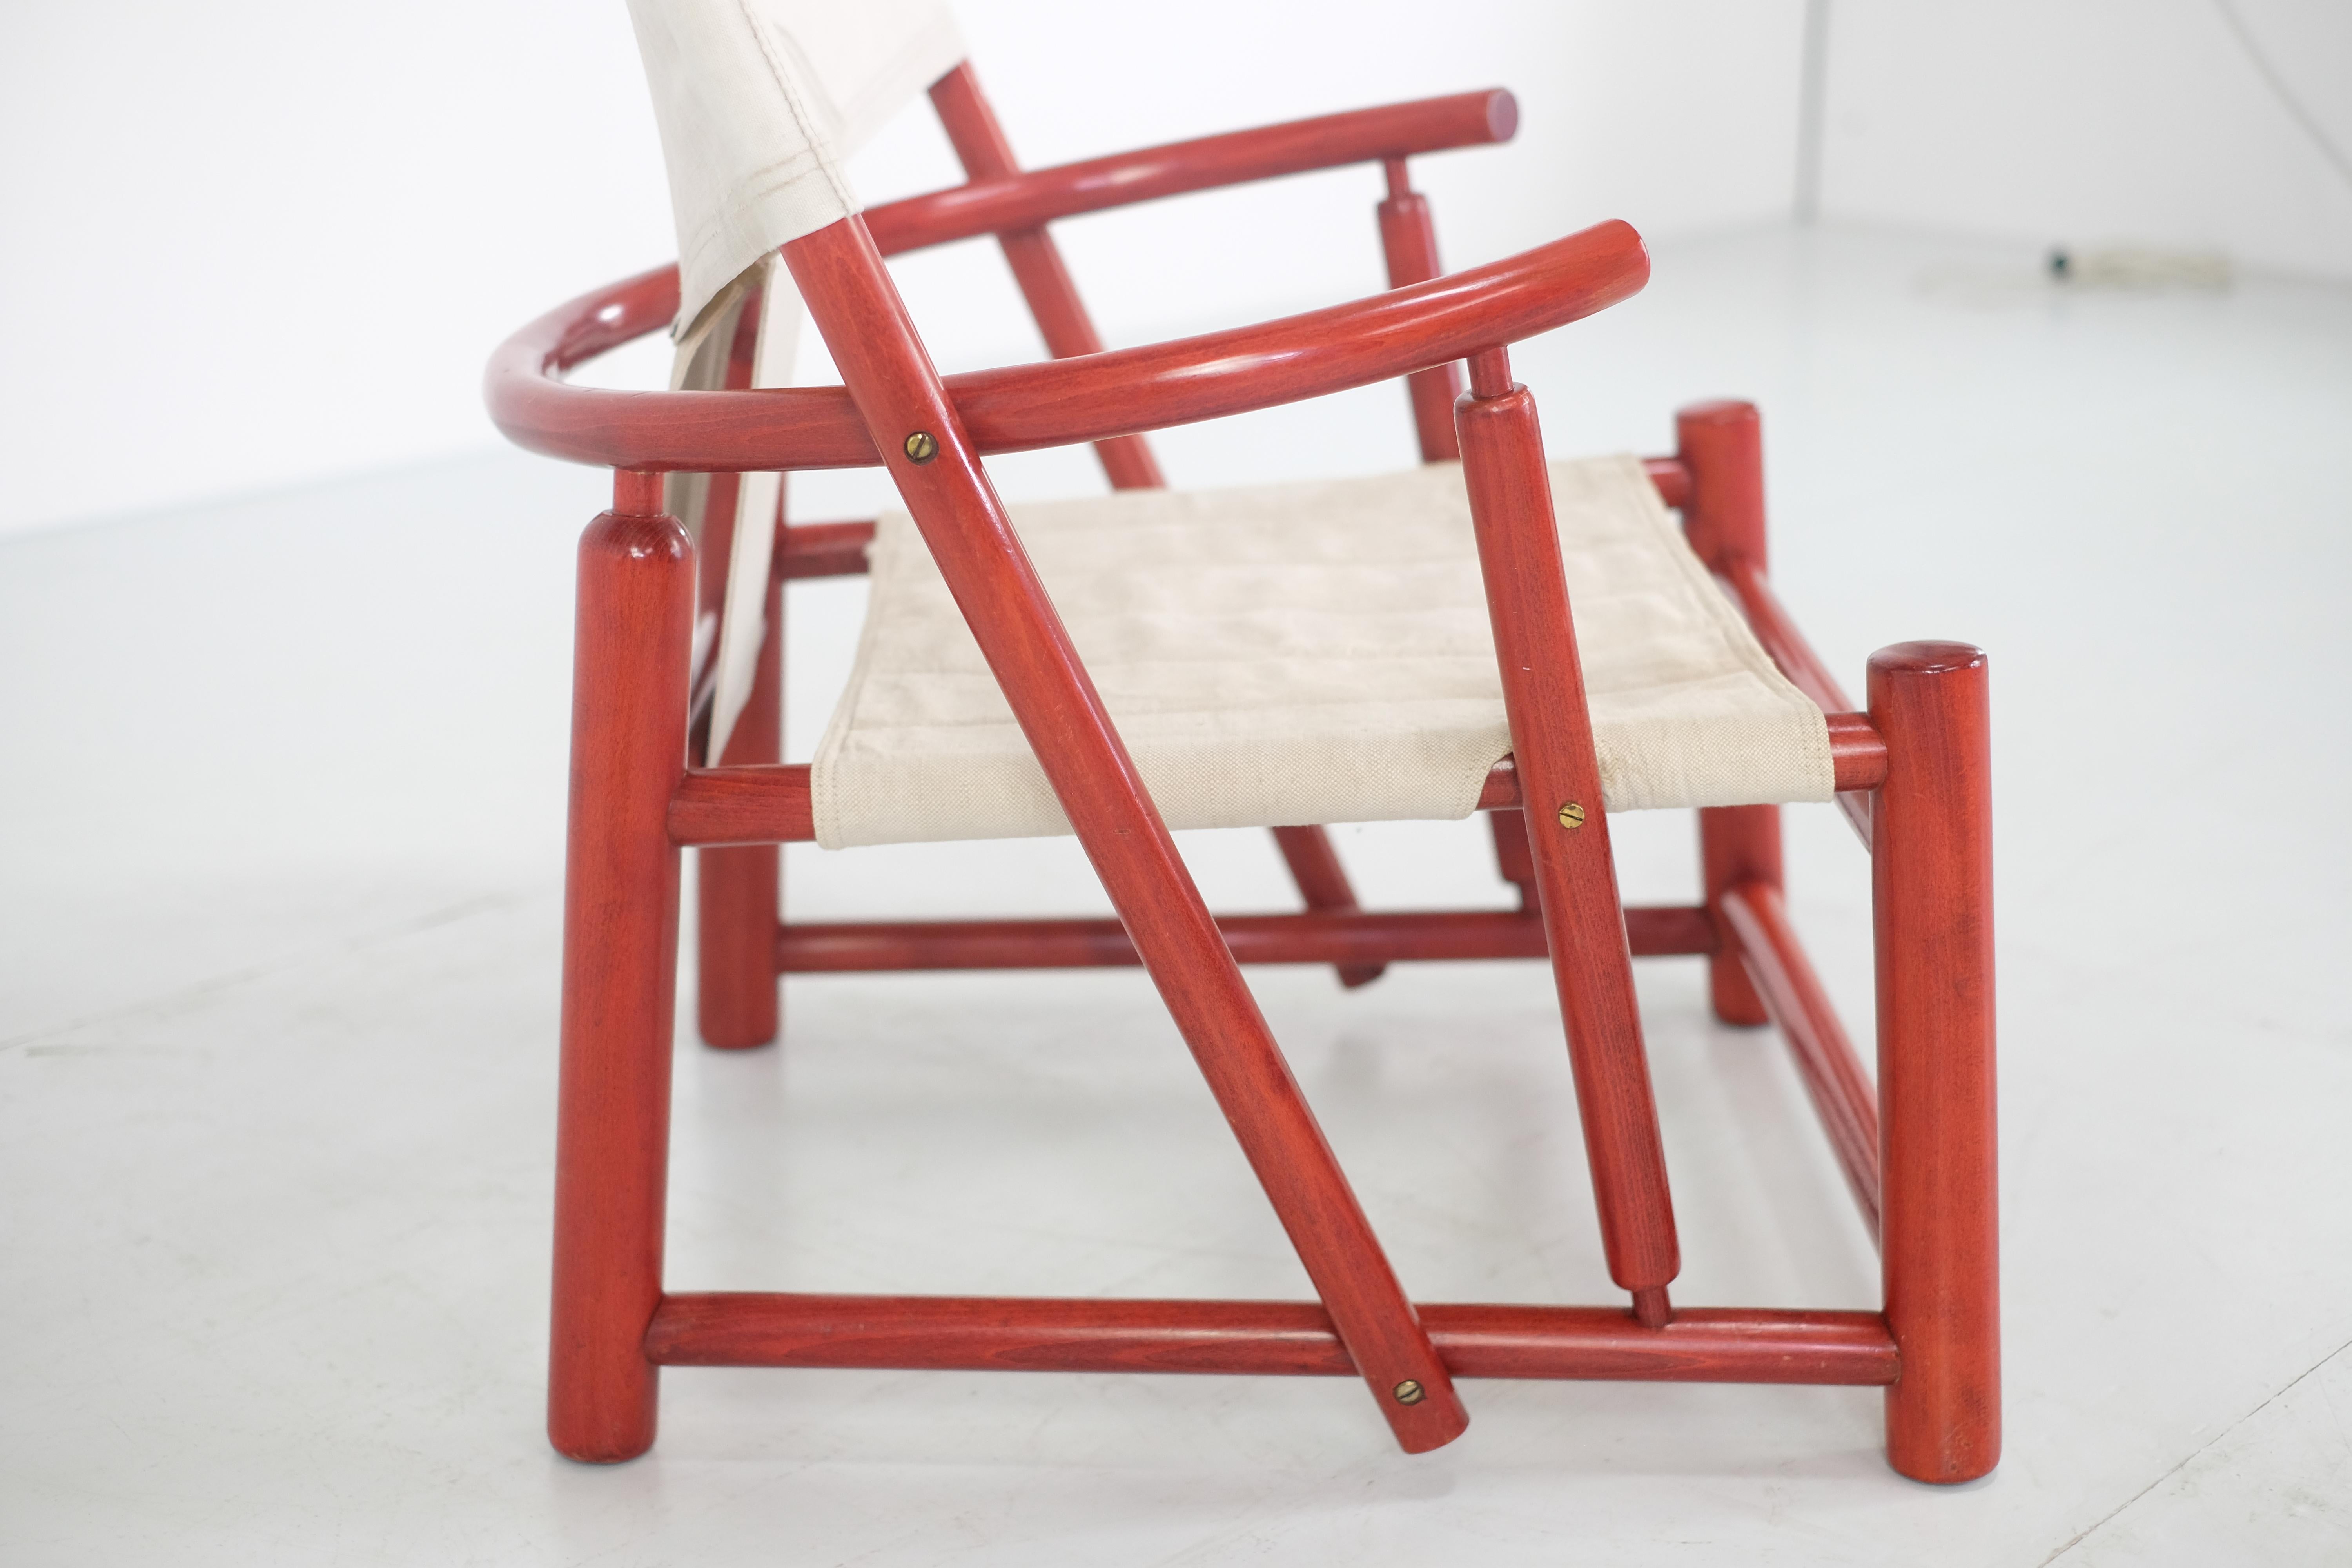 Late 20th Century Hoop Chair by Piero Palange & Werther Toffoloni for Germa - 1970s For Sale